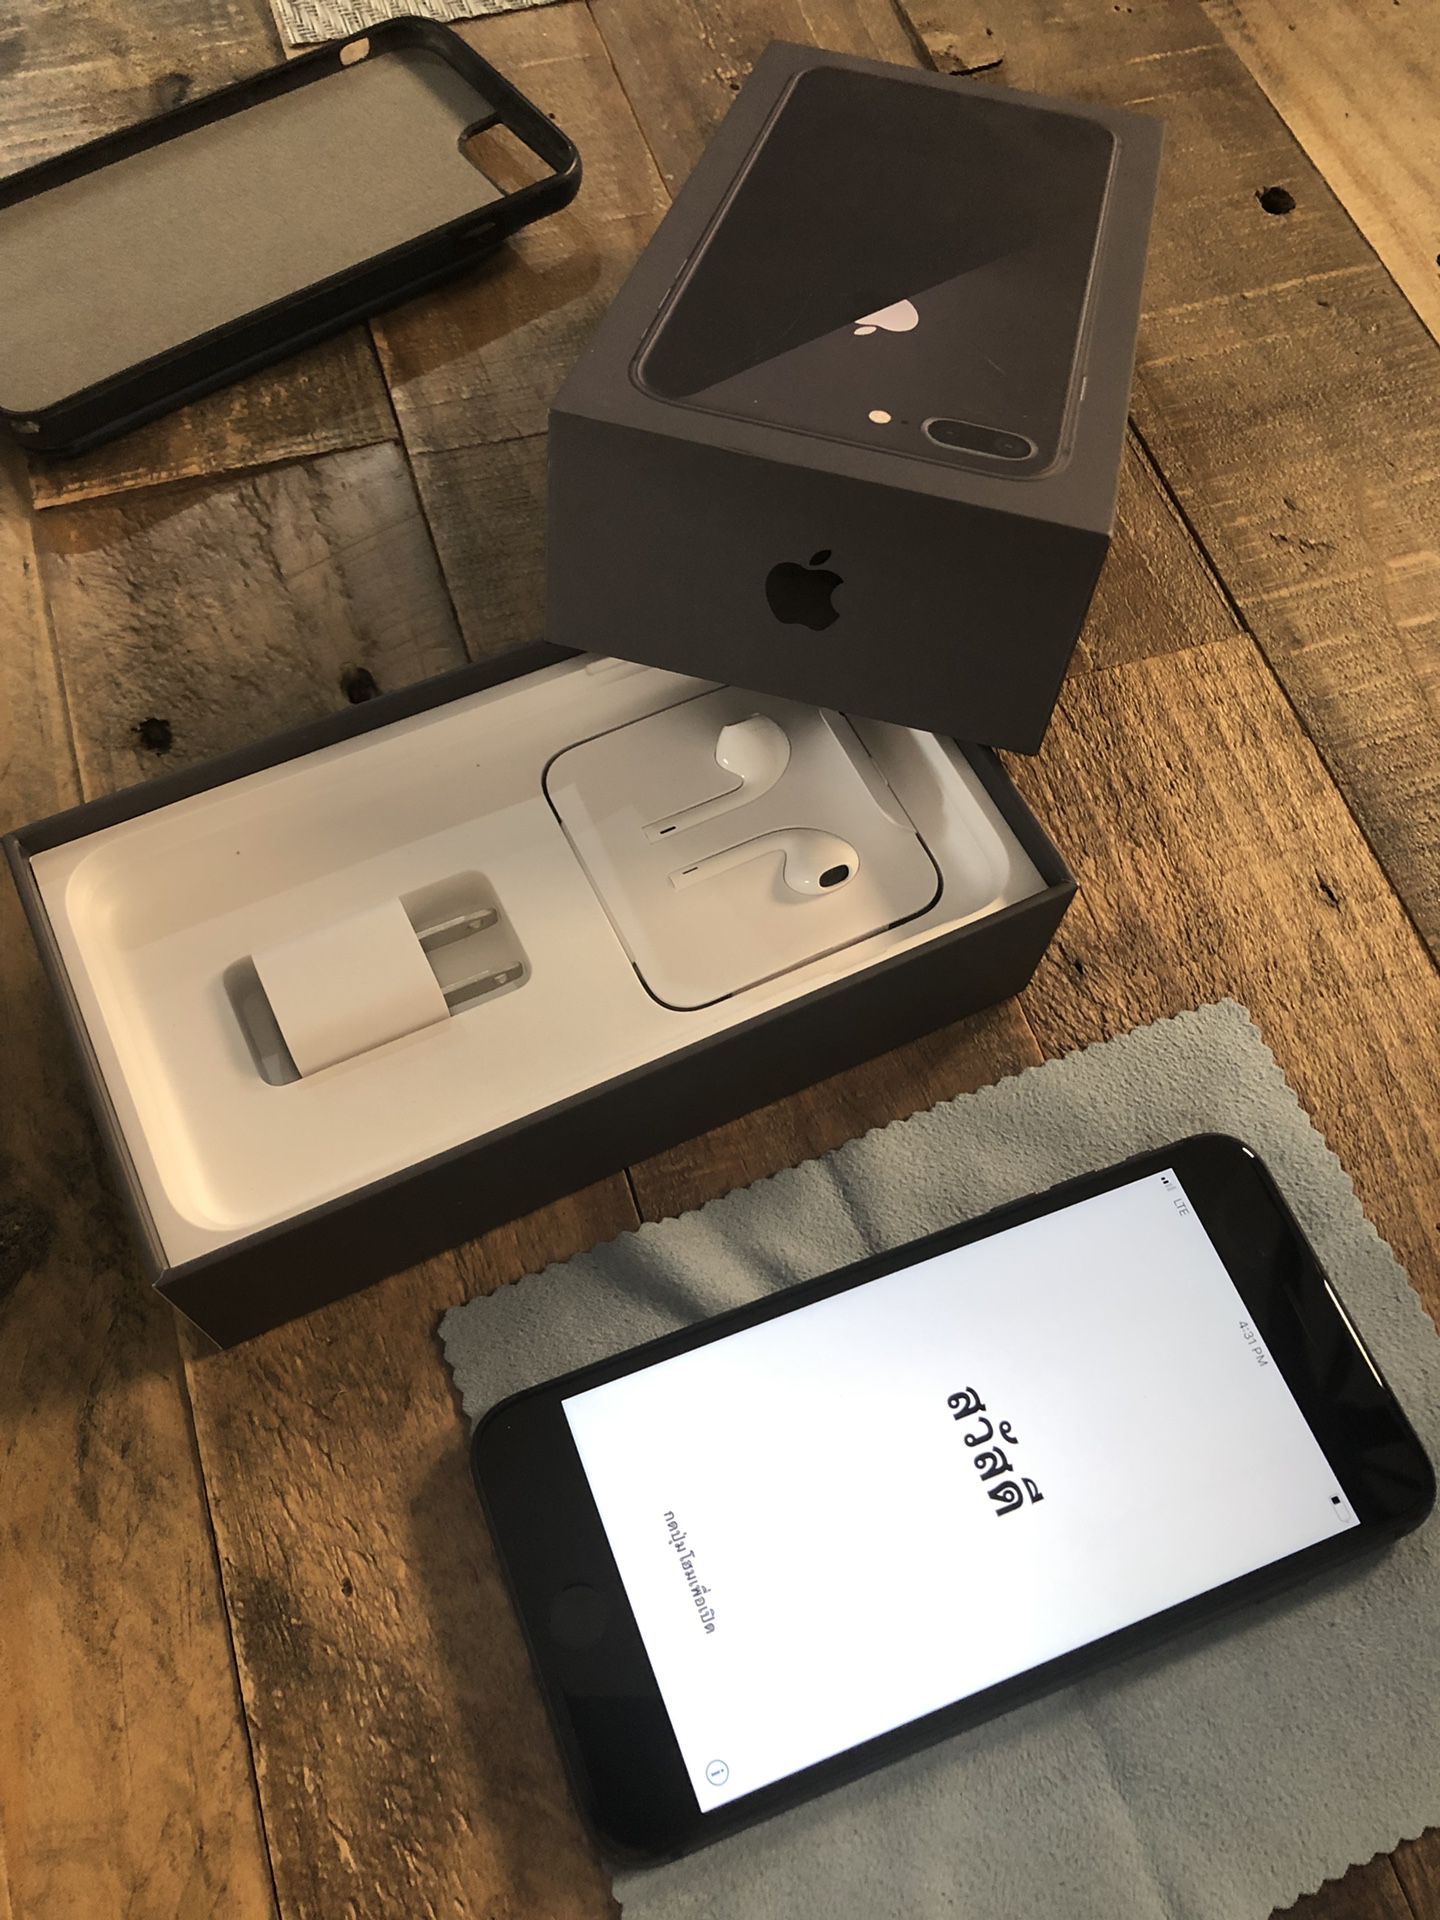 iPhone 8+ plus Space Grey 64GB MINT Condition Factory UNLOCKED wiped and ready to go! Original Box! Free Wallet Case!